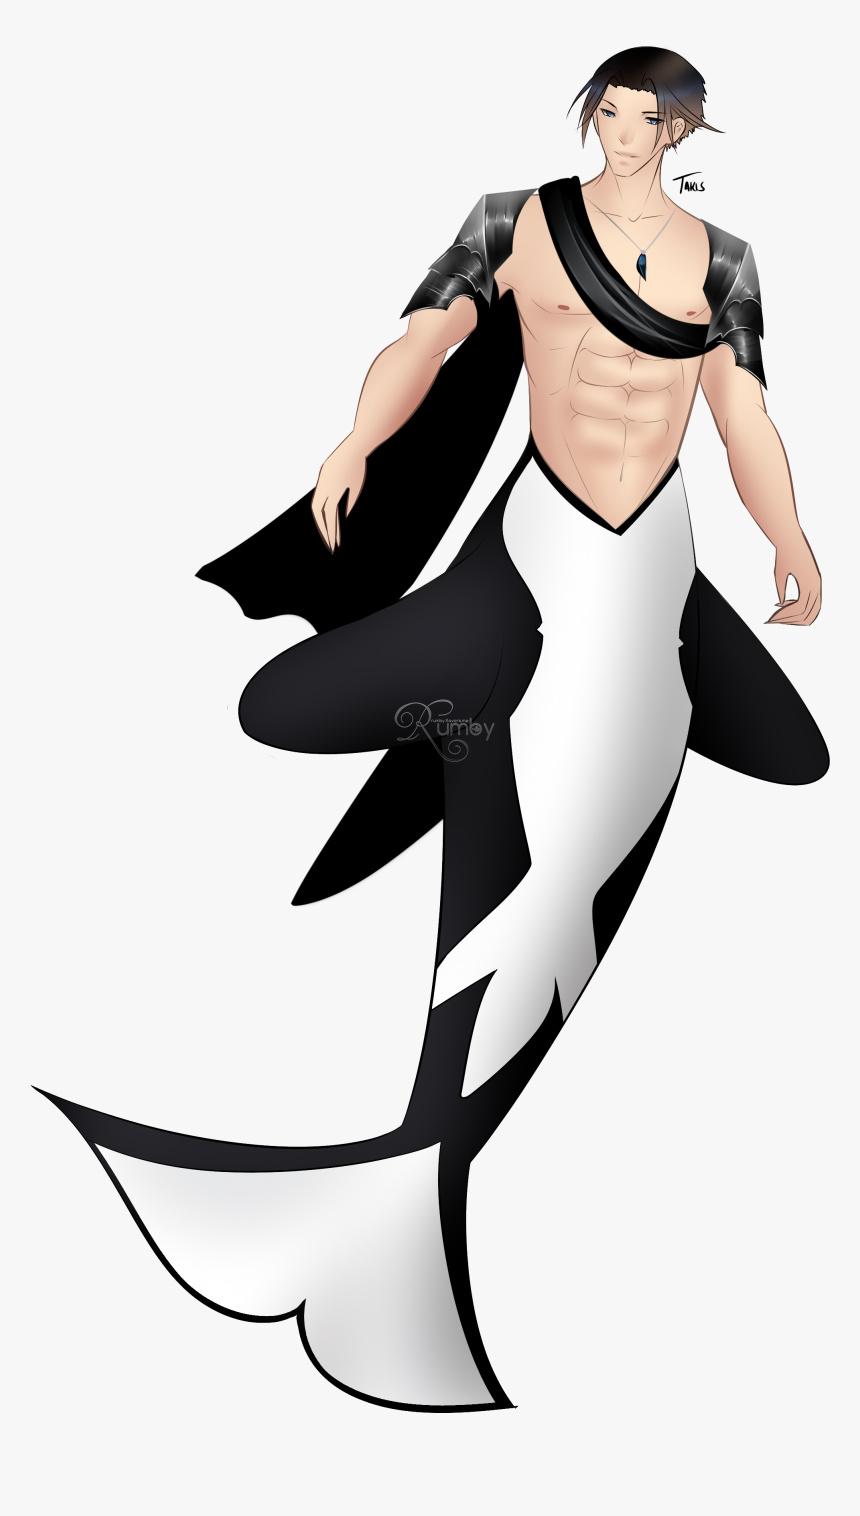 In The World Of Dream Crystal, Takis, An Orca Merman, - Illustration, HD Png Download, Free Download